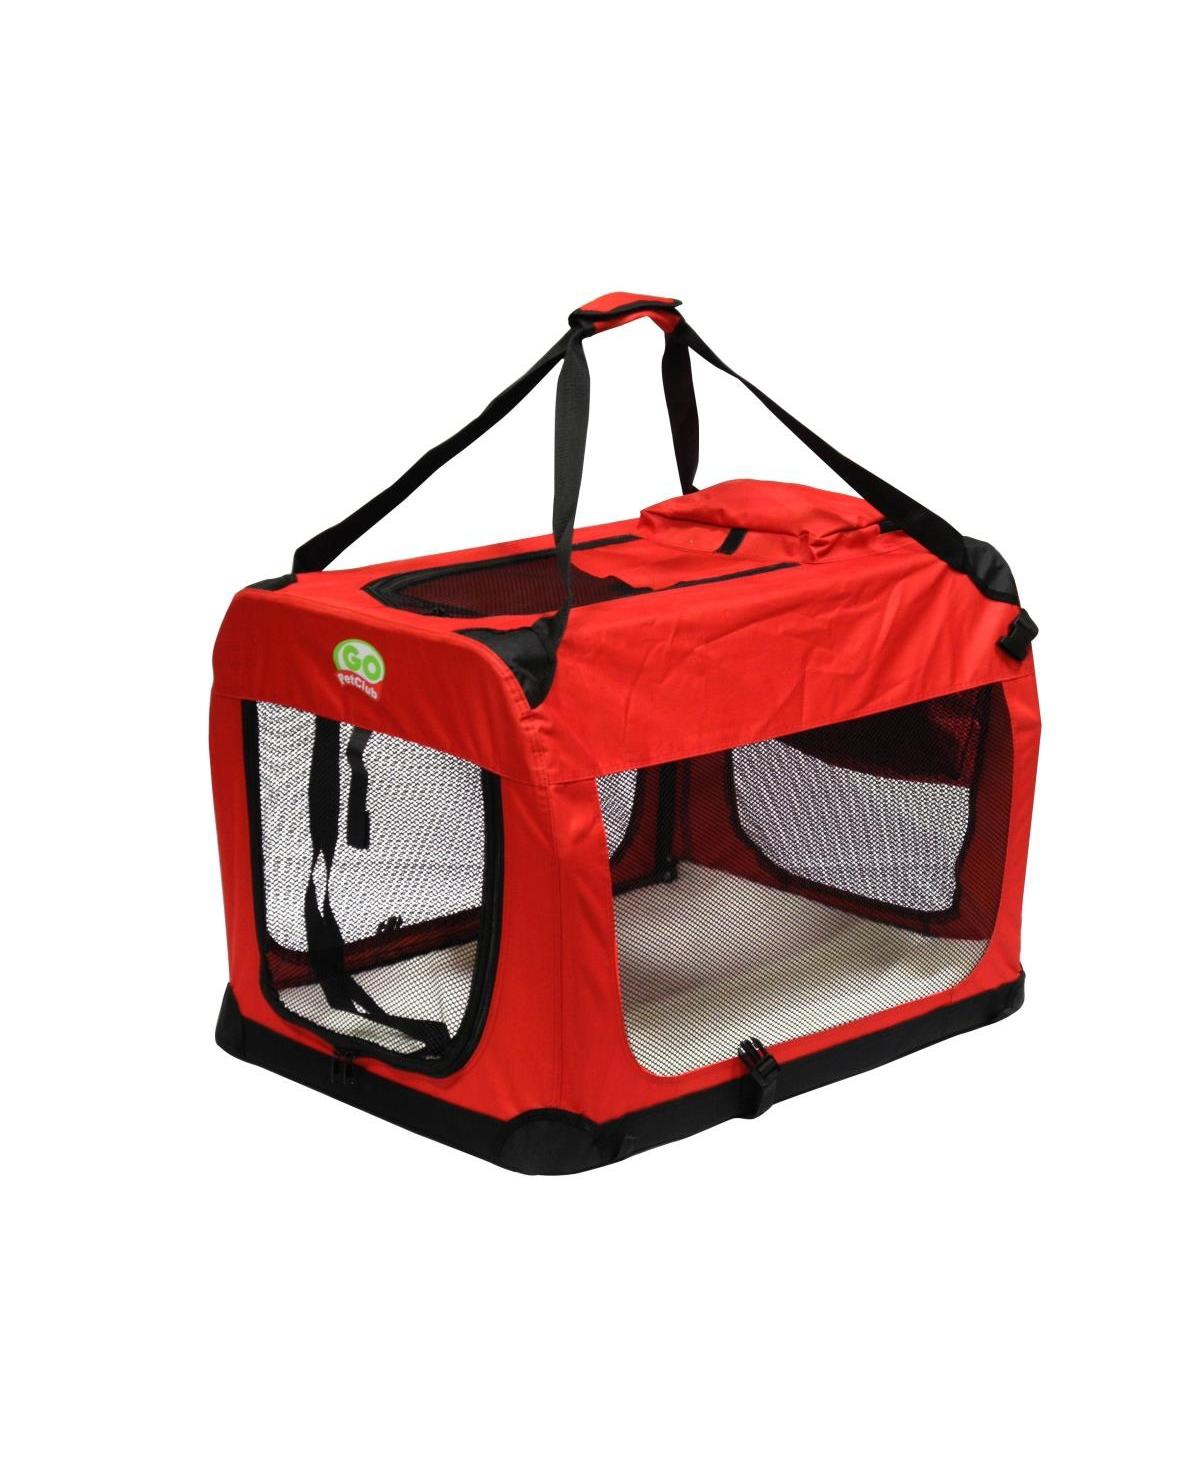 Cp-32 23.25 in. Foldable Pet Crate, Red - Open miscellaneous